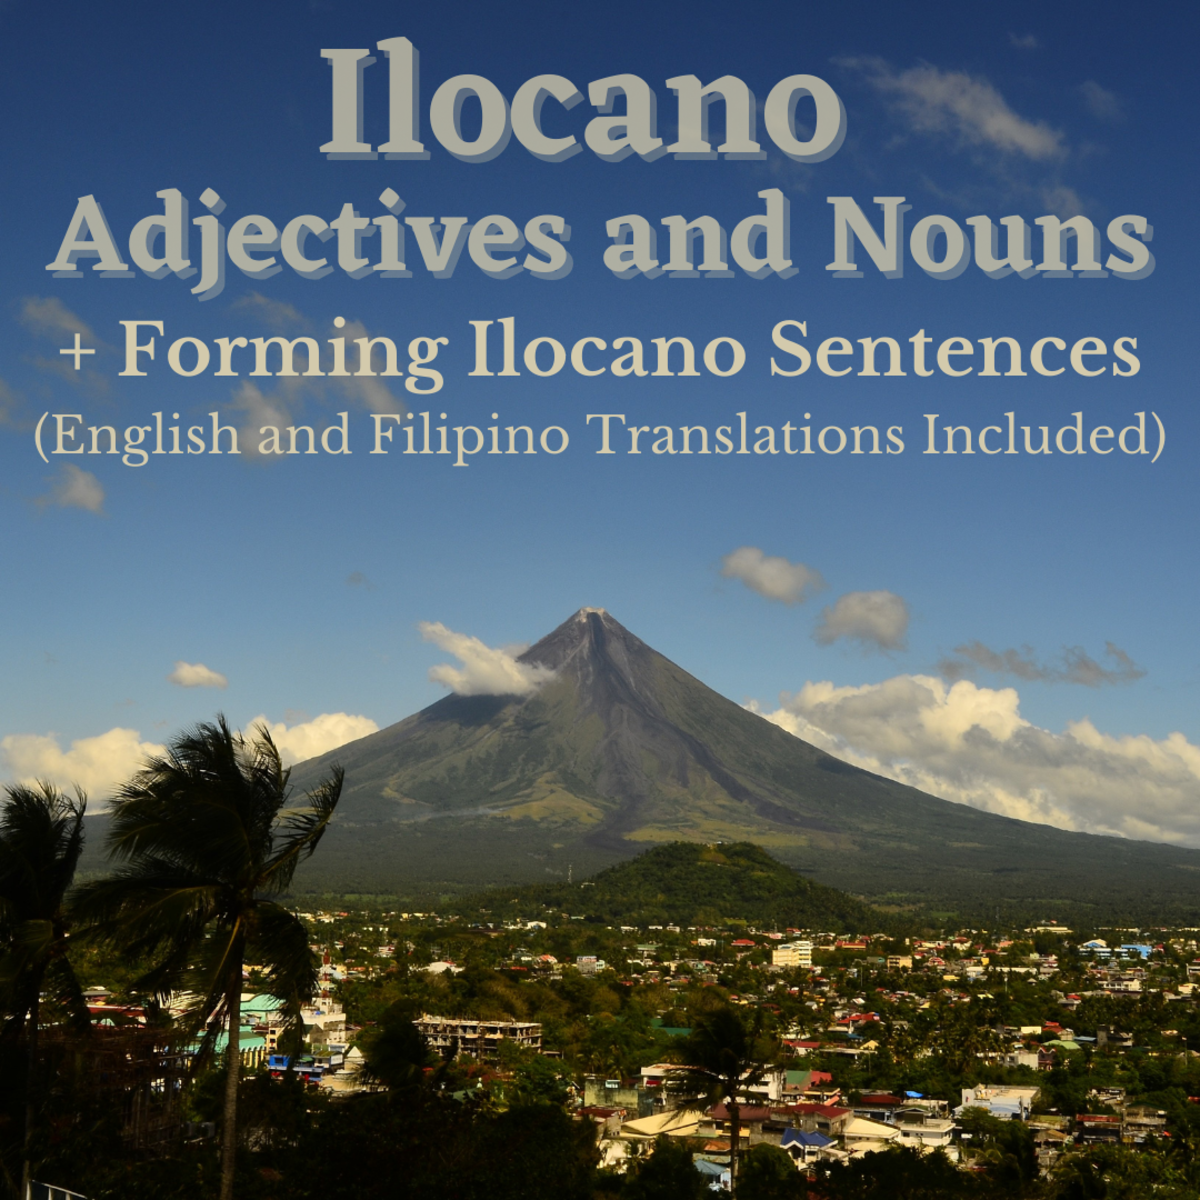 Some commonly used adjectives and nouns in Ilocano, plus a guide to forming sentences